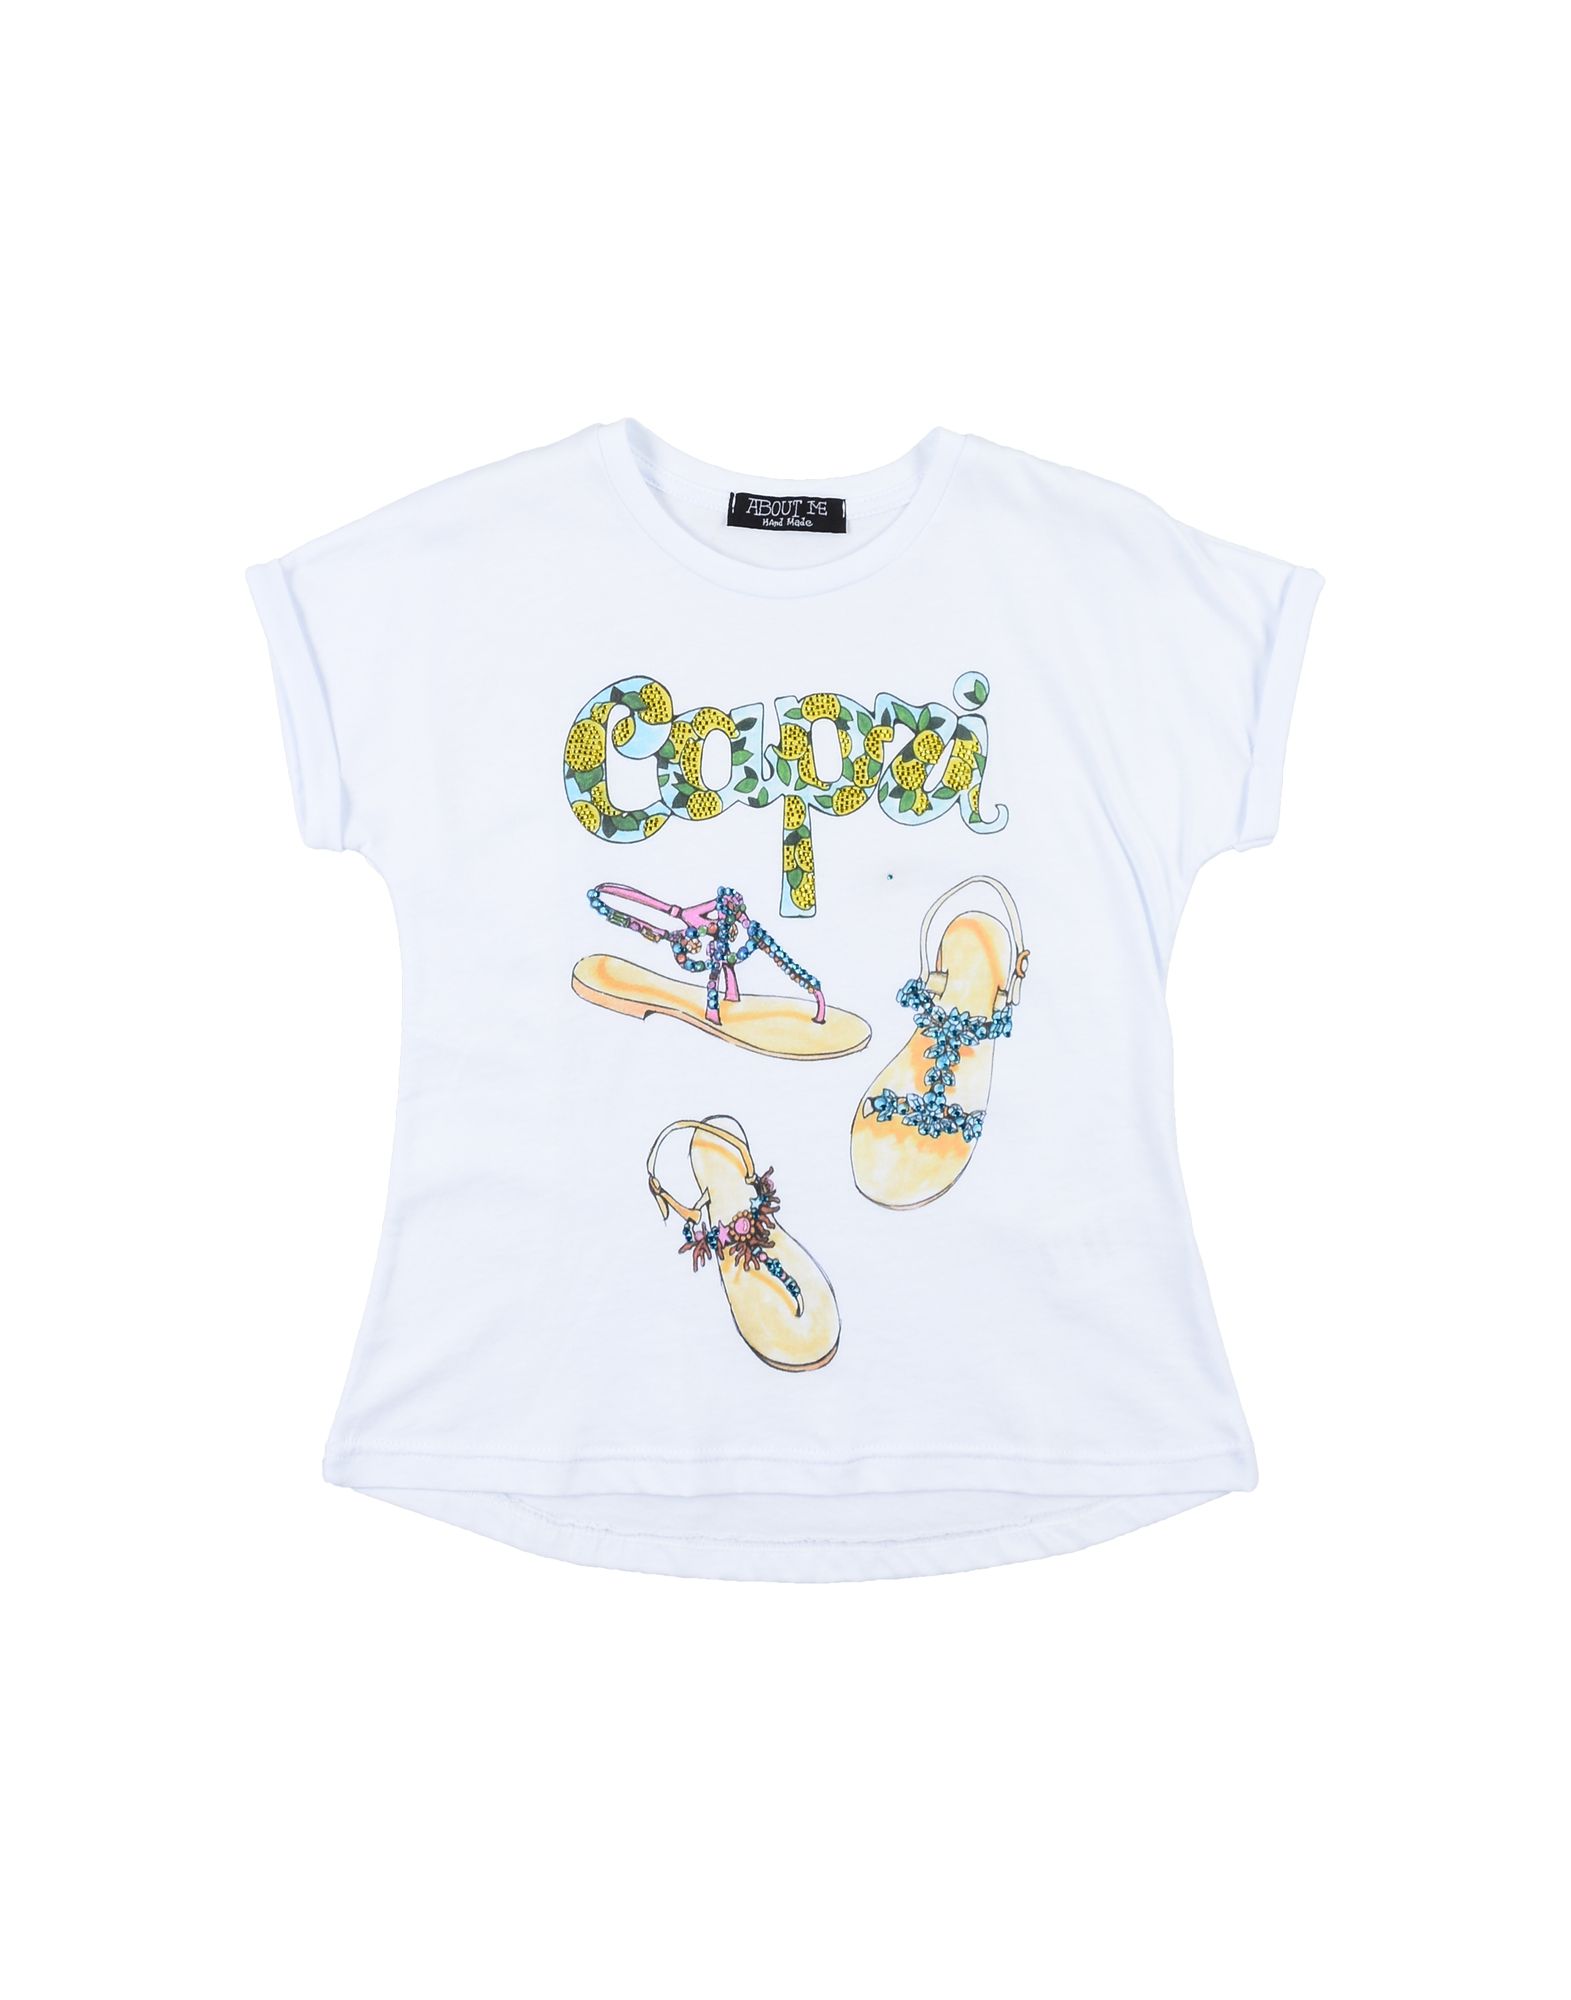 About Me Handmade Kids' T-shirts In White